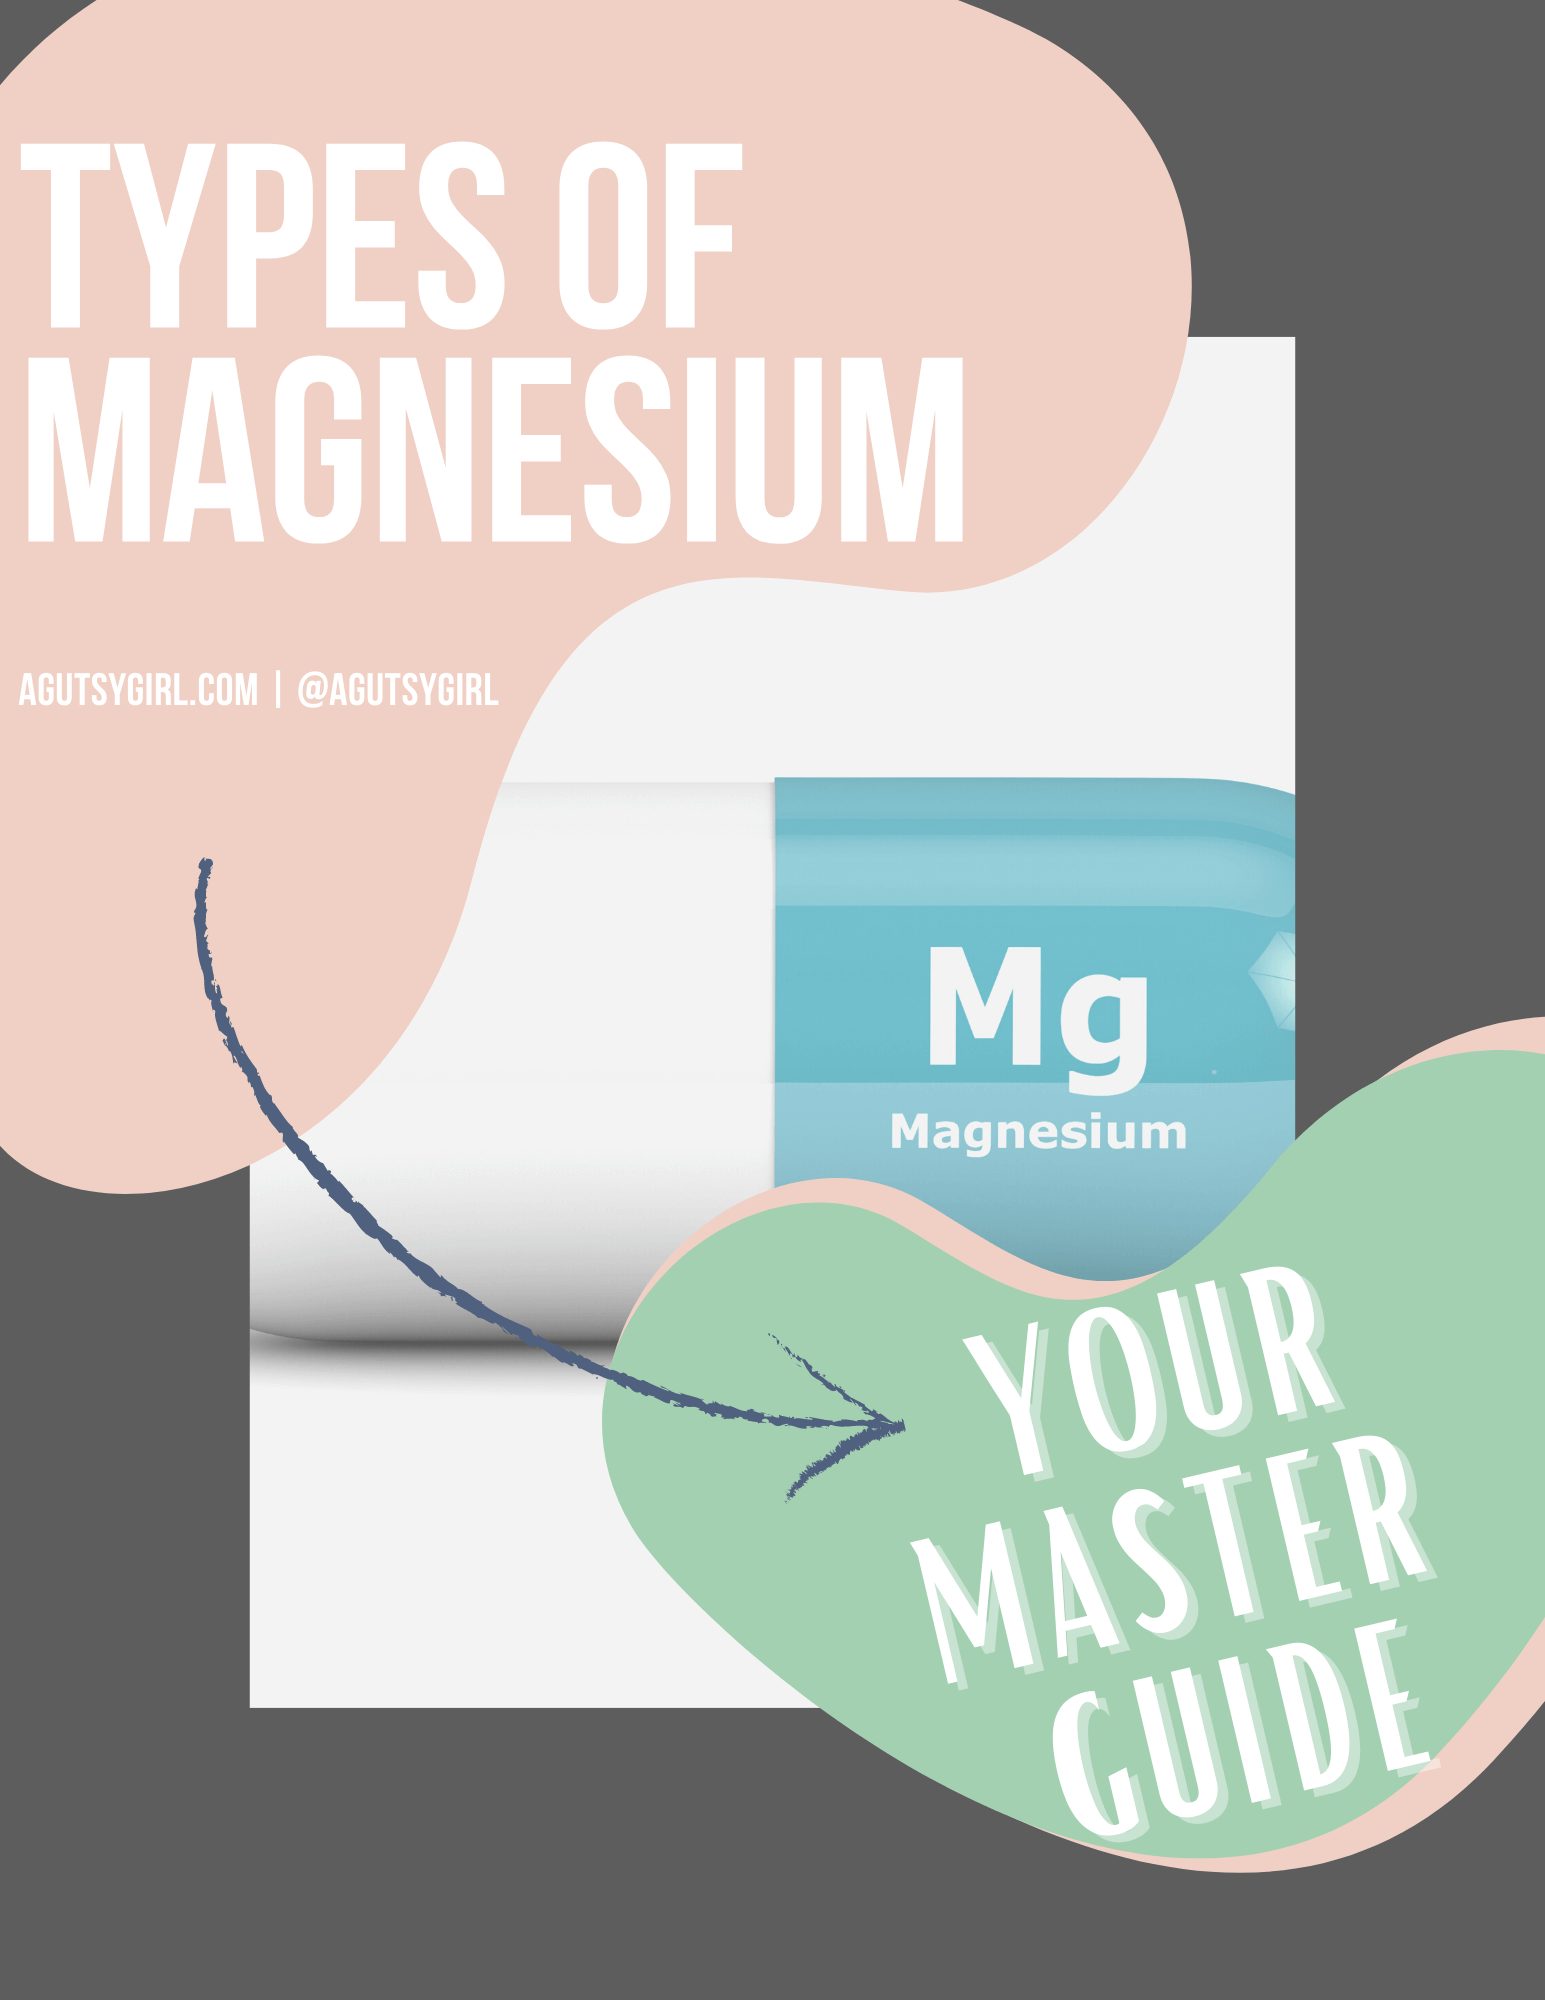 Types of Magnesium your master guide with A Gutsy Girl mineral agutsygirl.com #minerals #magnesium #constipation